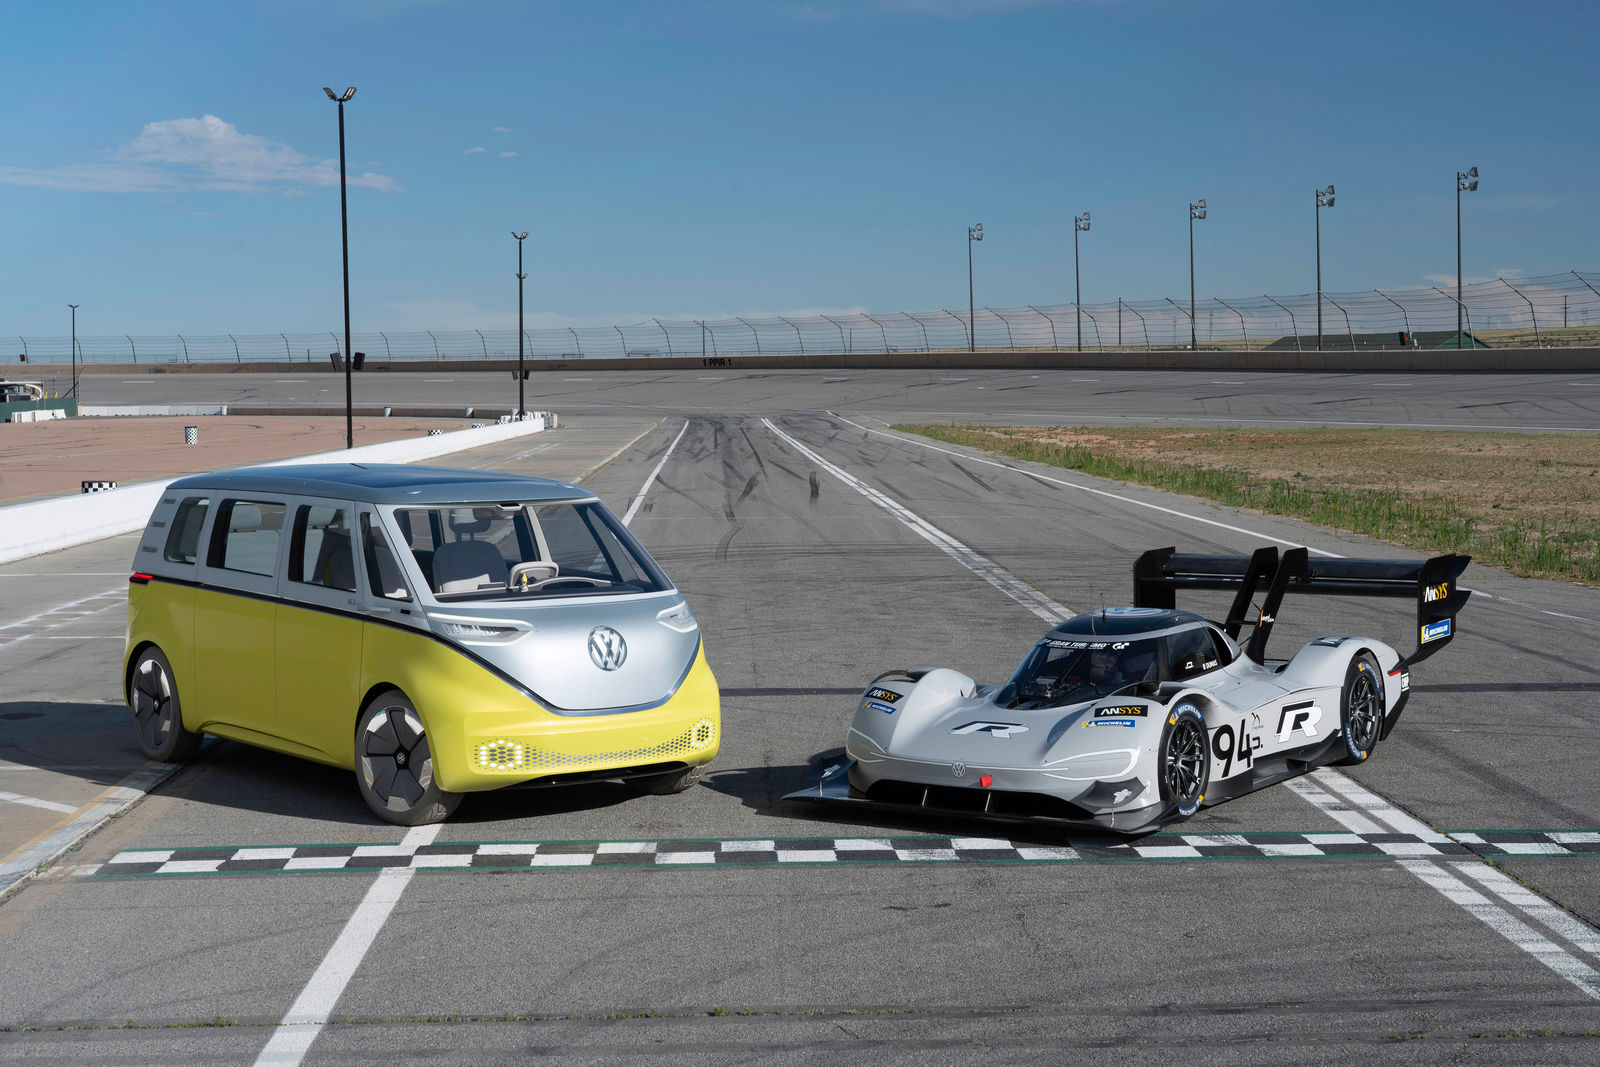 Two days to go until the record attempt: kW buzz on Pikes Peak